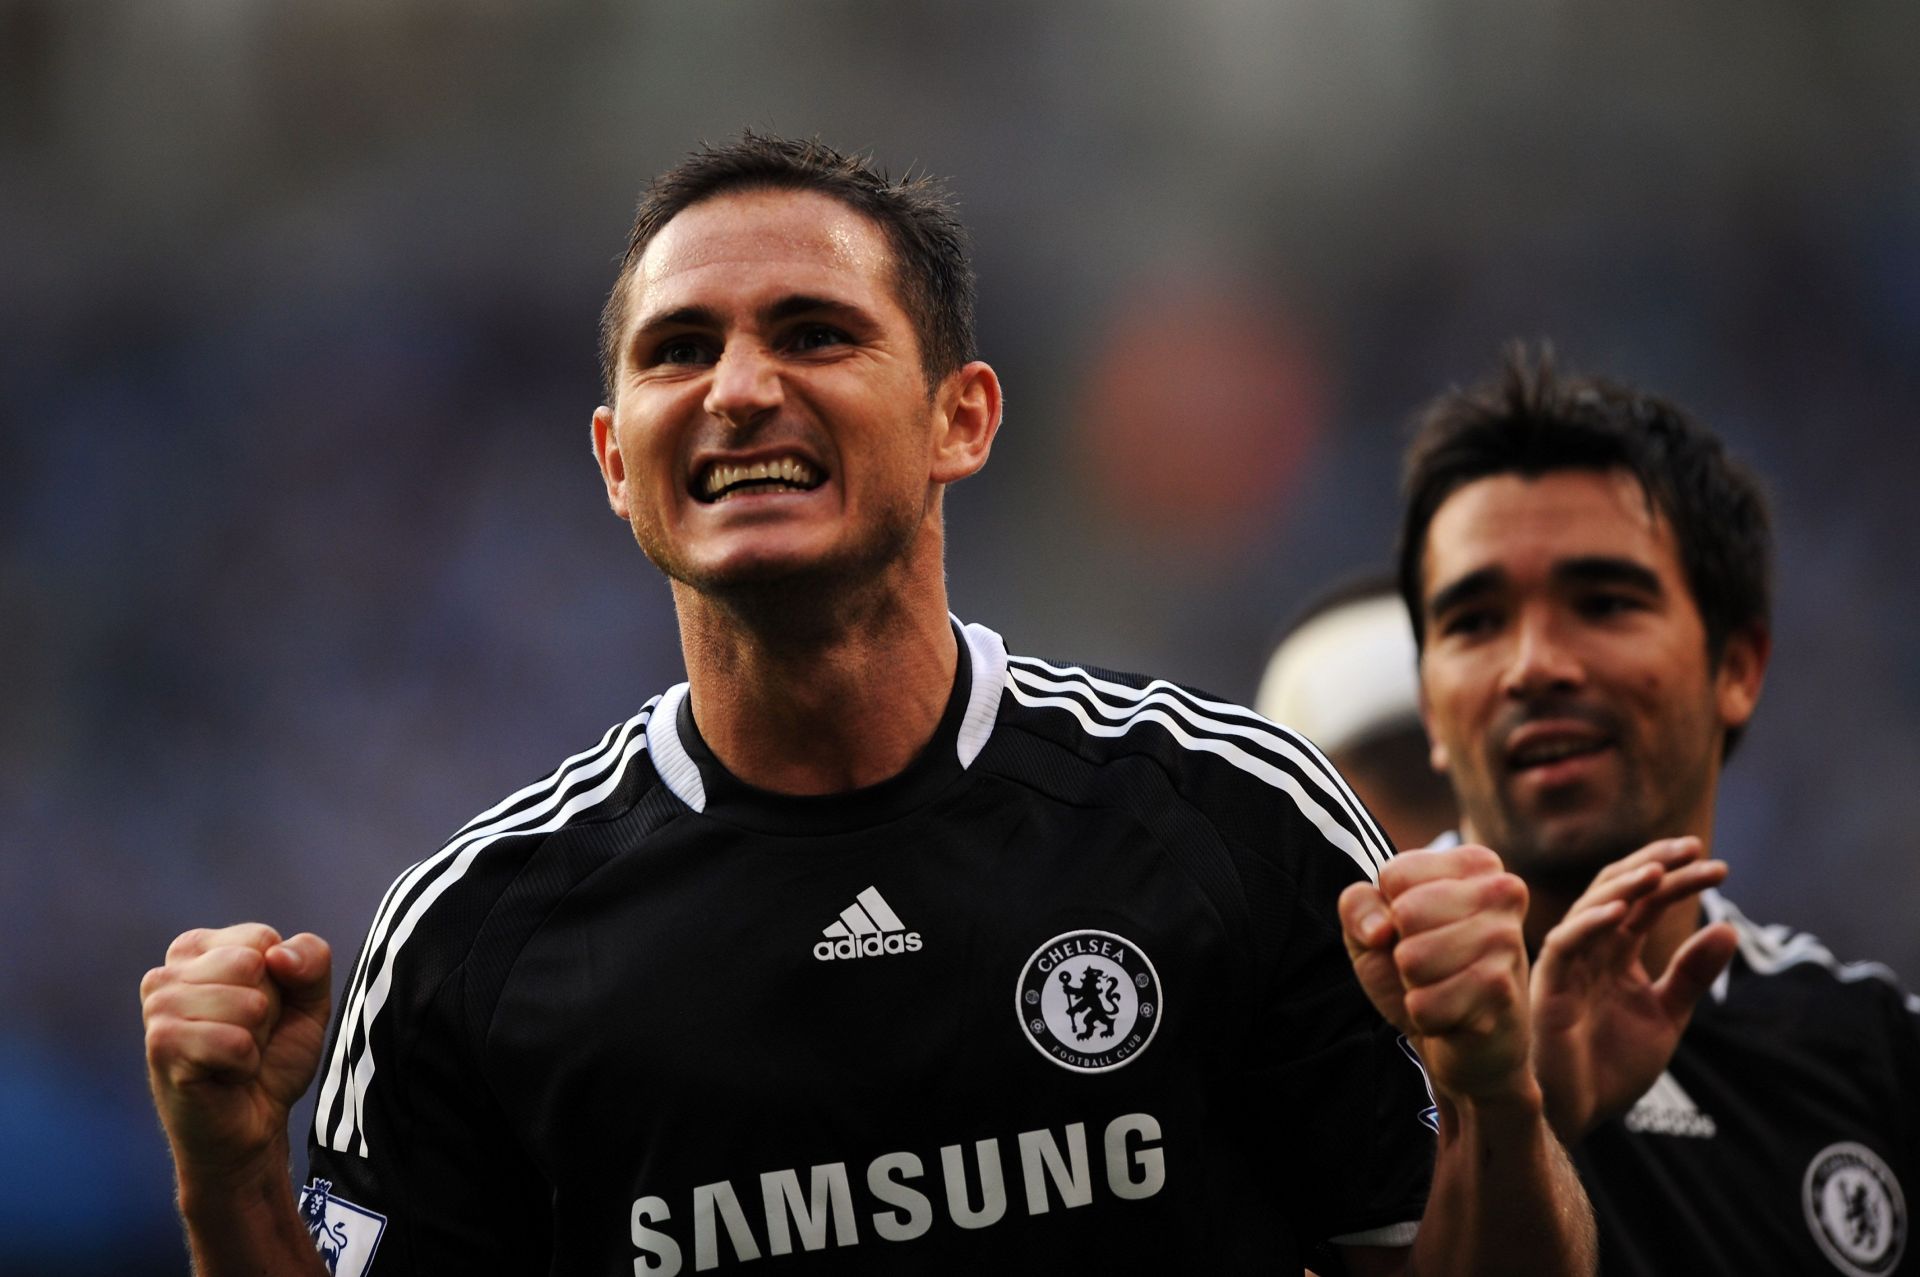 Frank Lampard (left) was a terrific performer under Mourinho.